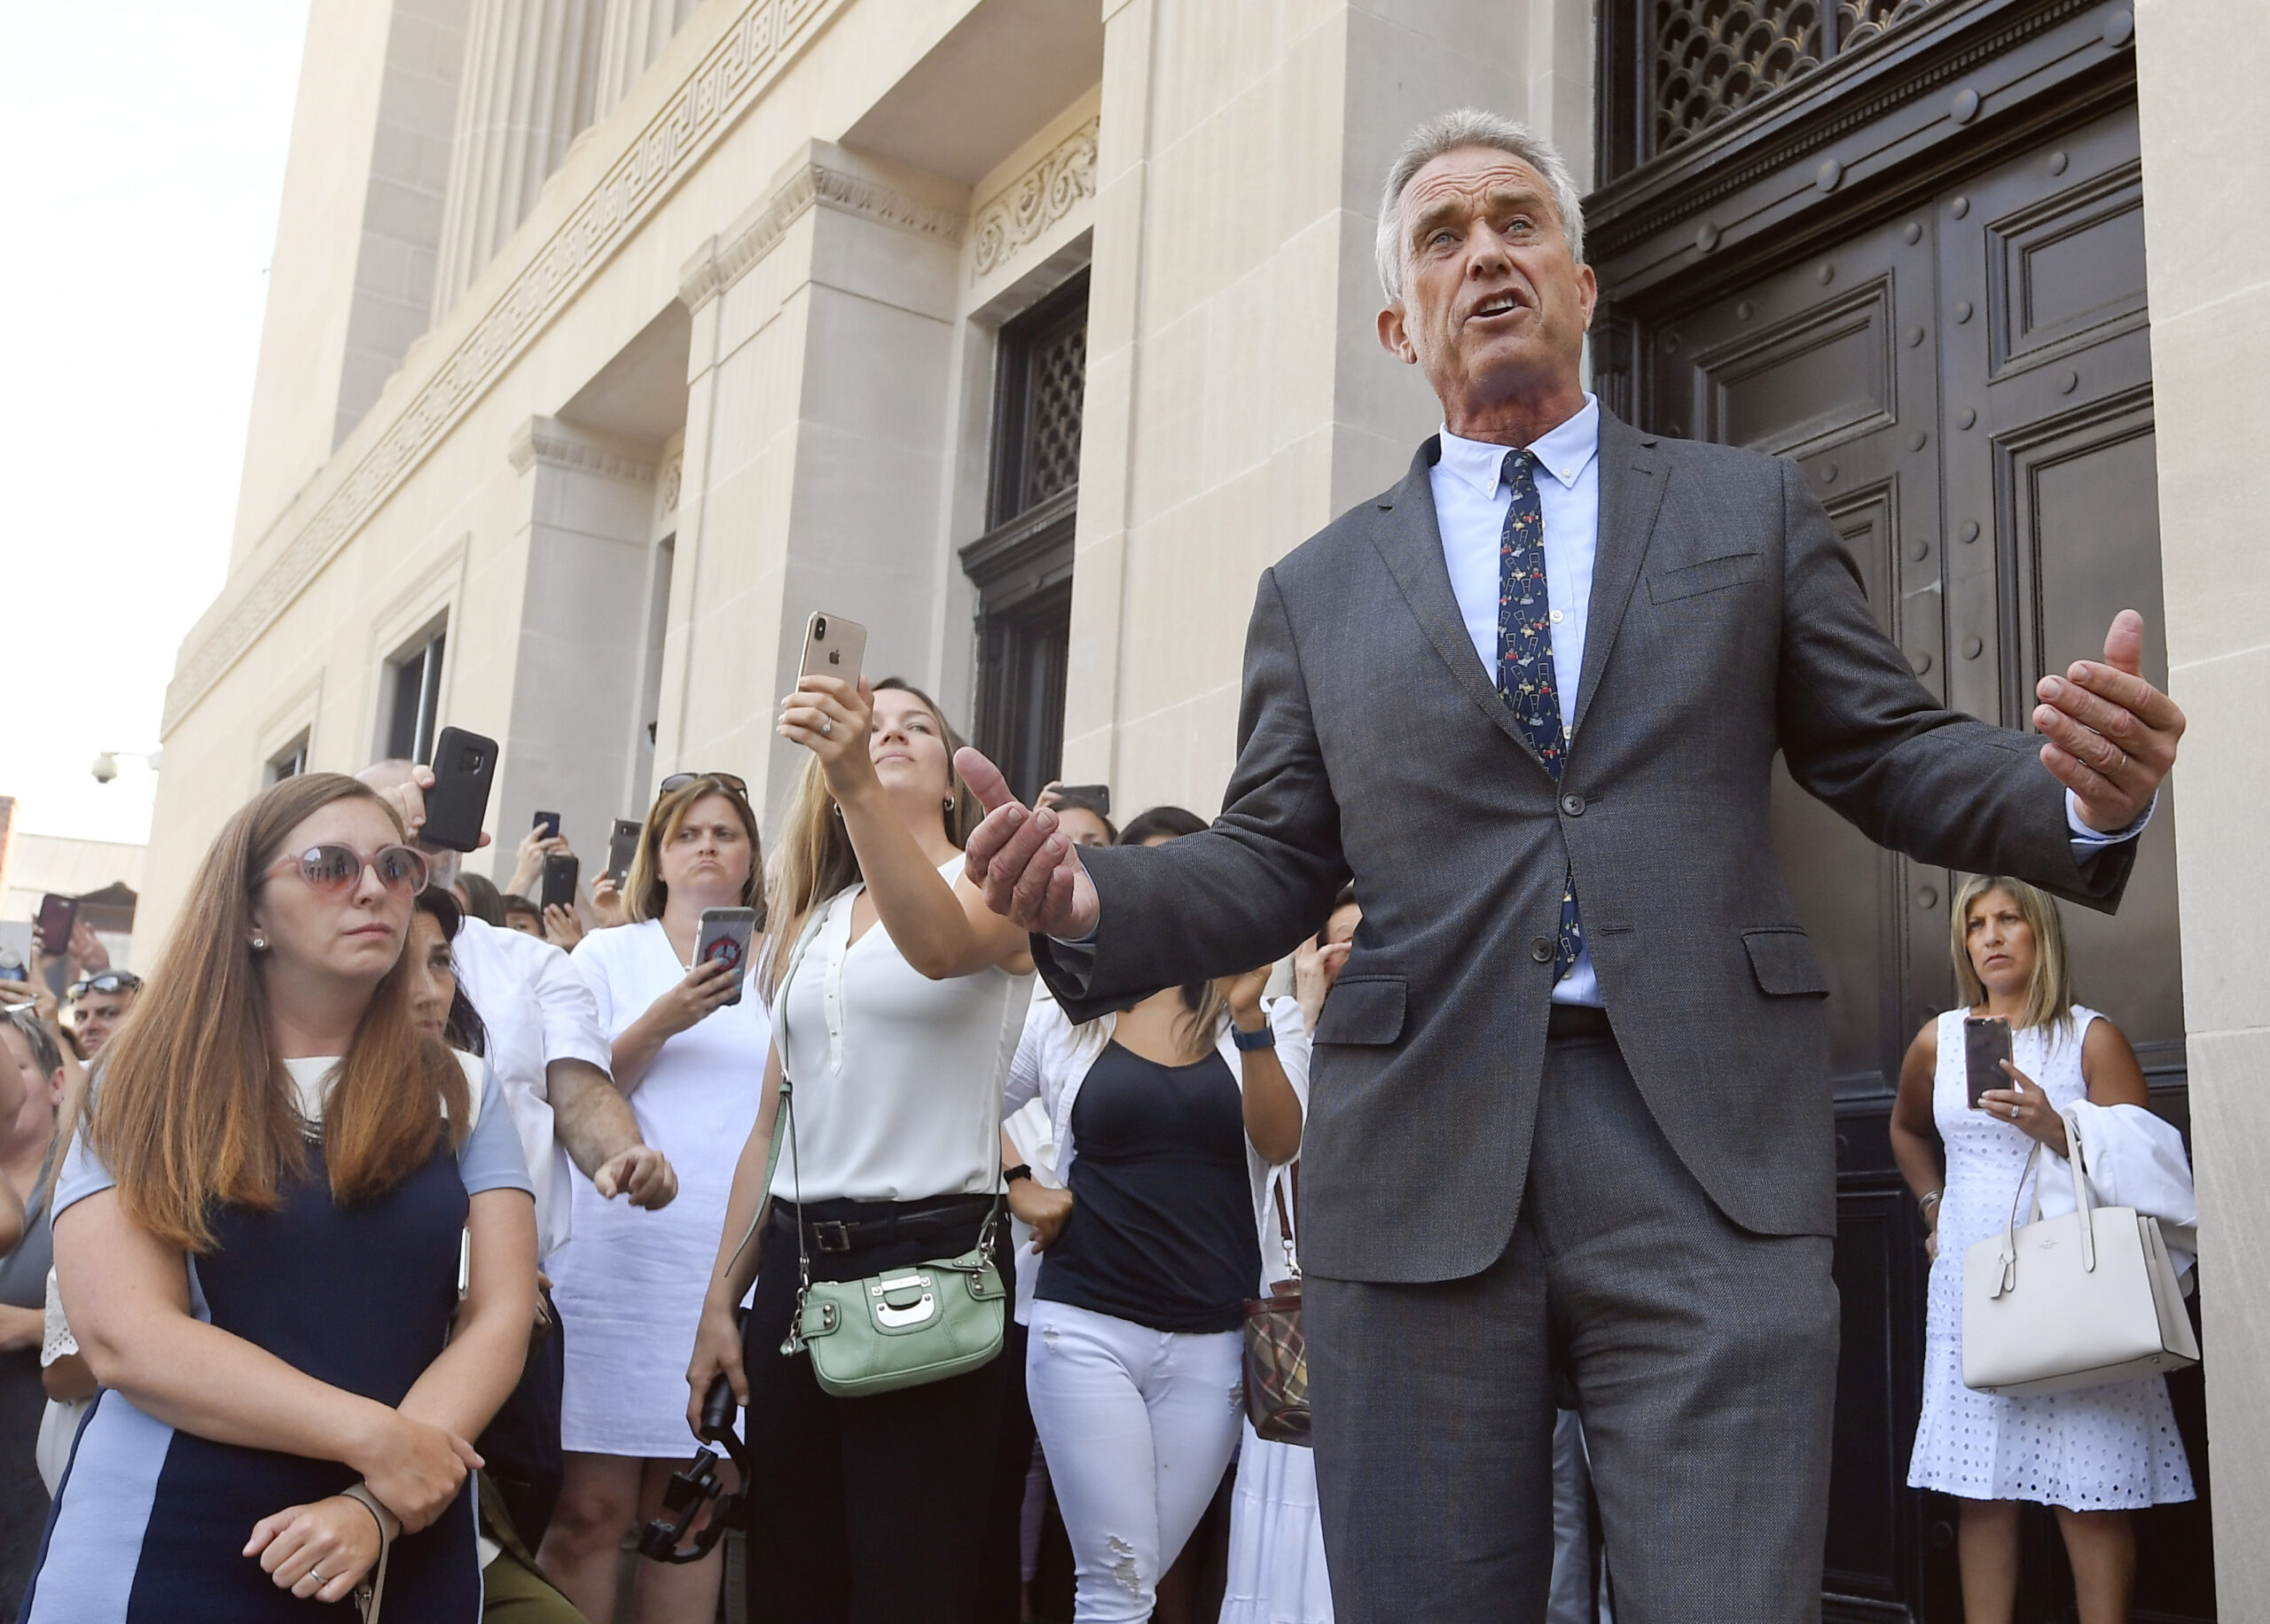 FILE - Attorney Robert F. Kennedy, Jr. speaks after a hearing challenging the constitutionality of the state legislature's repeal of the religious exemption to vaccination on behalf of New York state families who held lawful religious exemptions, during a rally outside the Albany County Courthouse Aug. 14, 2019, in Albany, N.Y. Instagram and Facebook have suspended Children's Health Defense from its platforms for repeated violations of its policies on COVID-19 misinformation. The nonprofit led by Robert Kennedy Jr. is regularly criticized by public health advocates for its misleading claims about vaccines and the COVID-19 pandemic. (AP Photo/Hans Pennink, File)